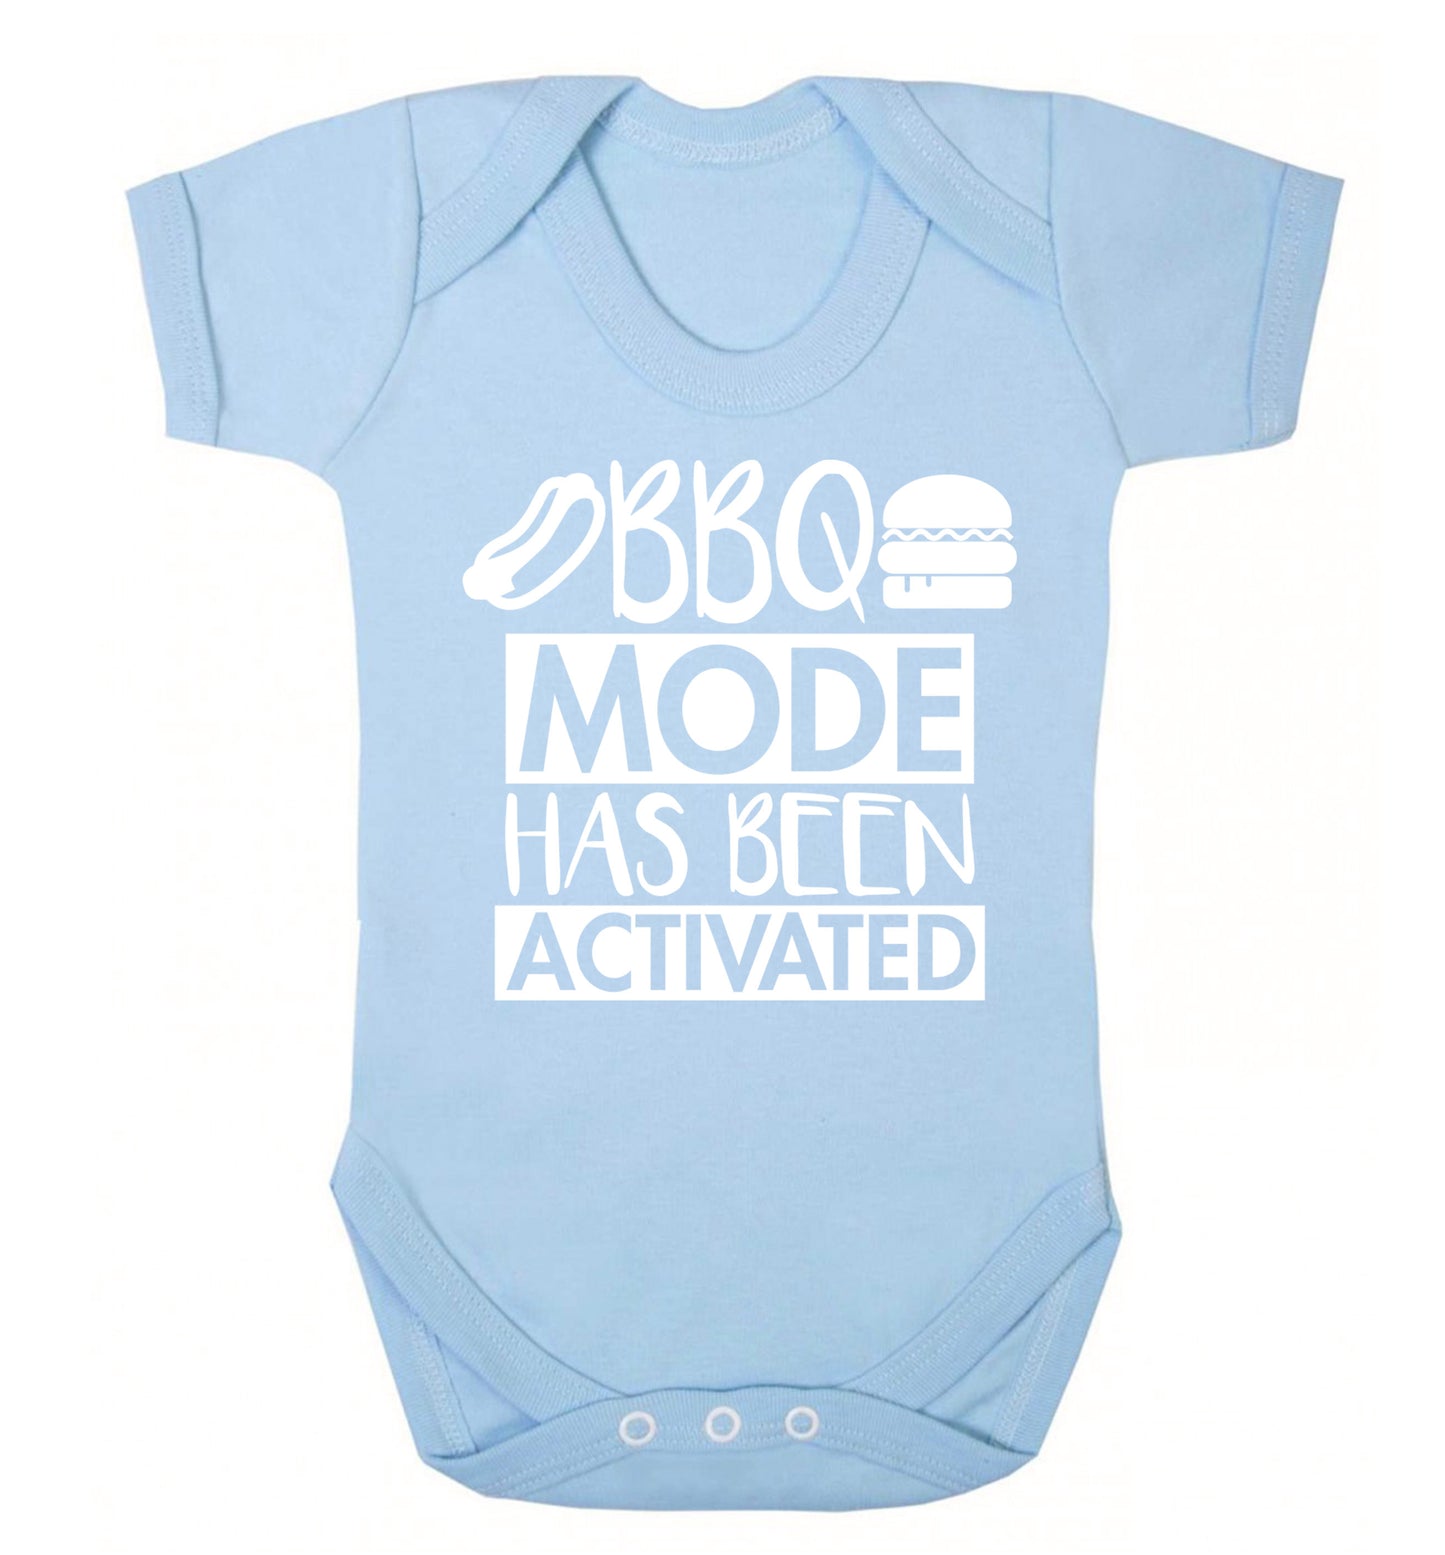 Bbq mode has been activated Baby Vest pale blue 18-24 months